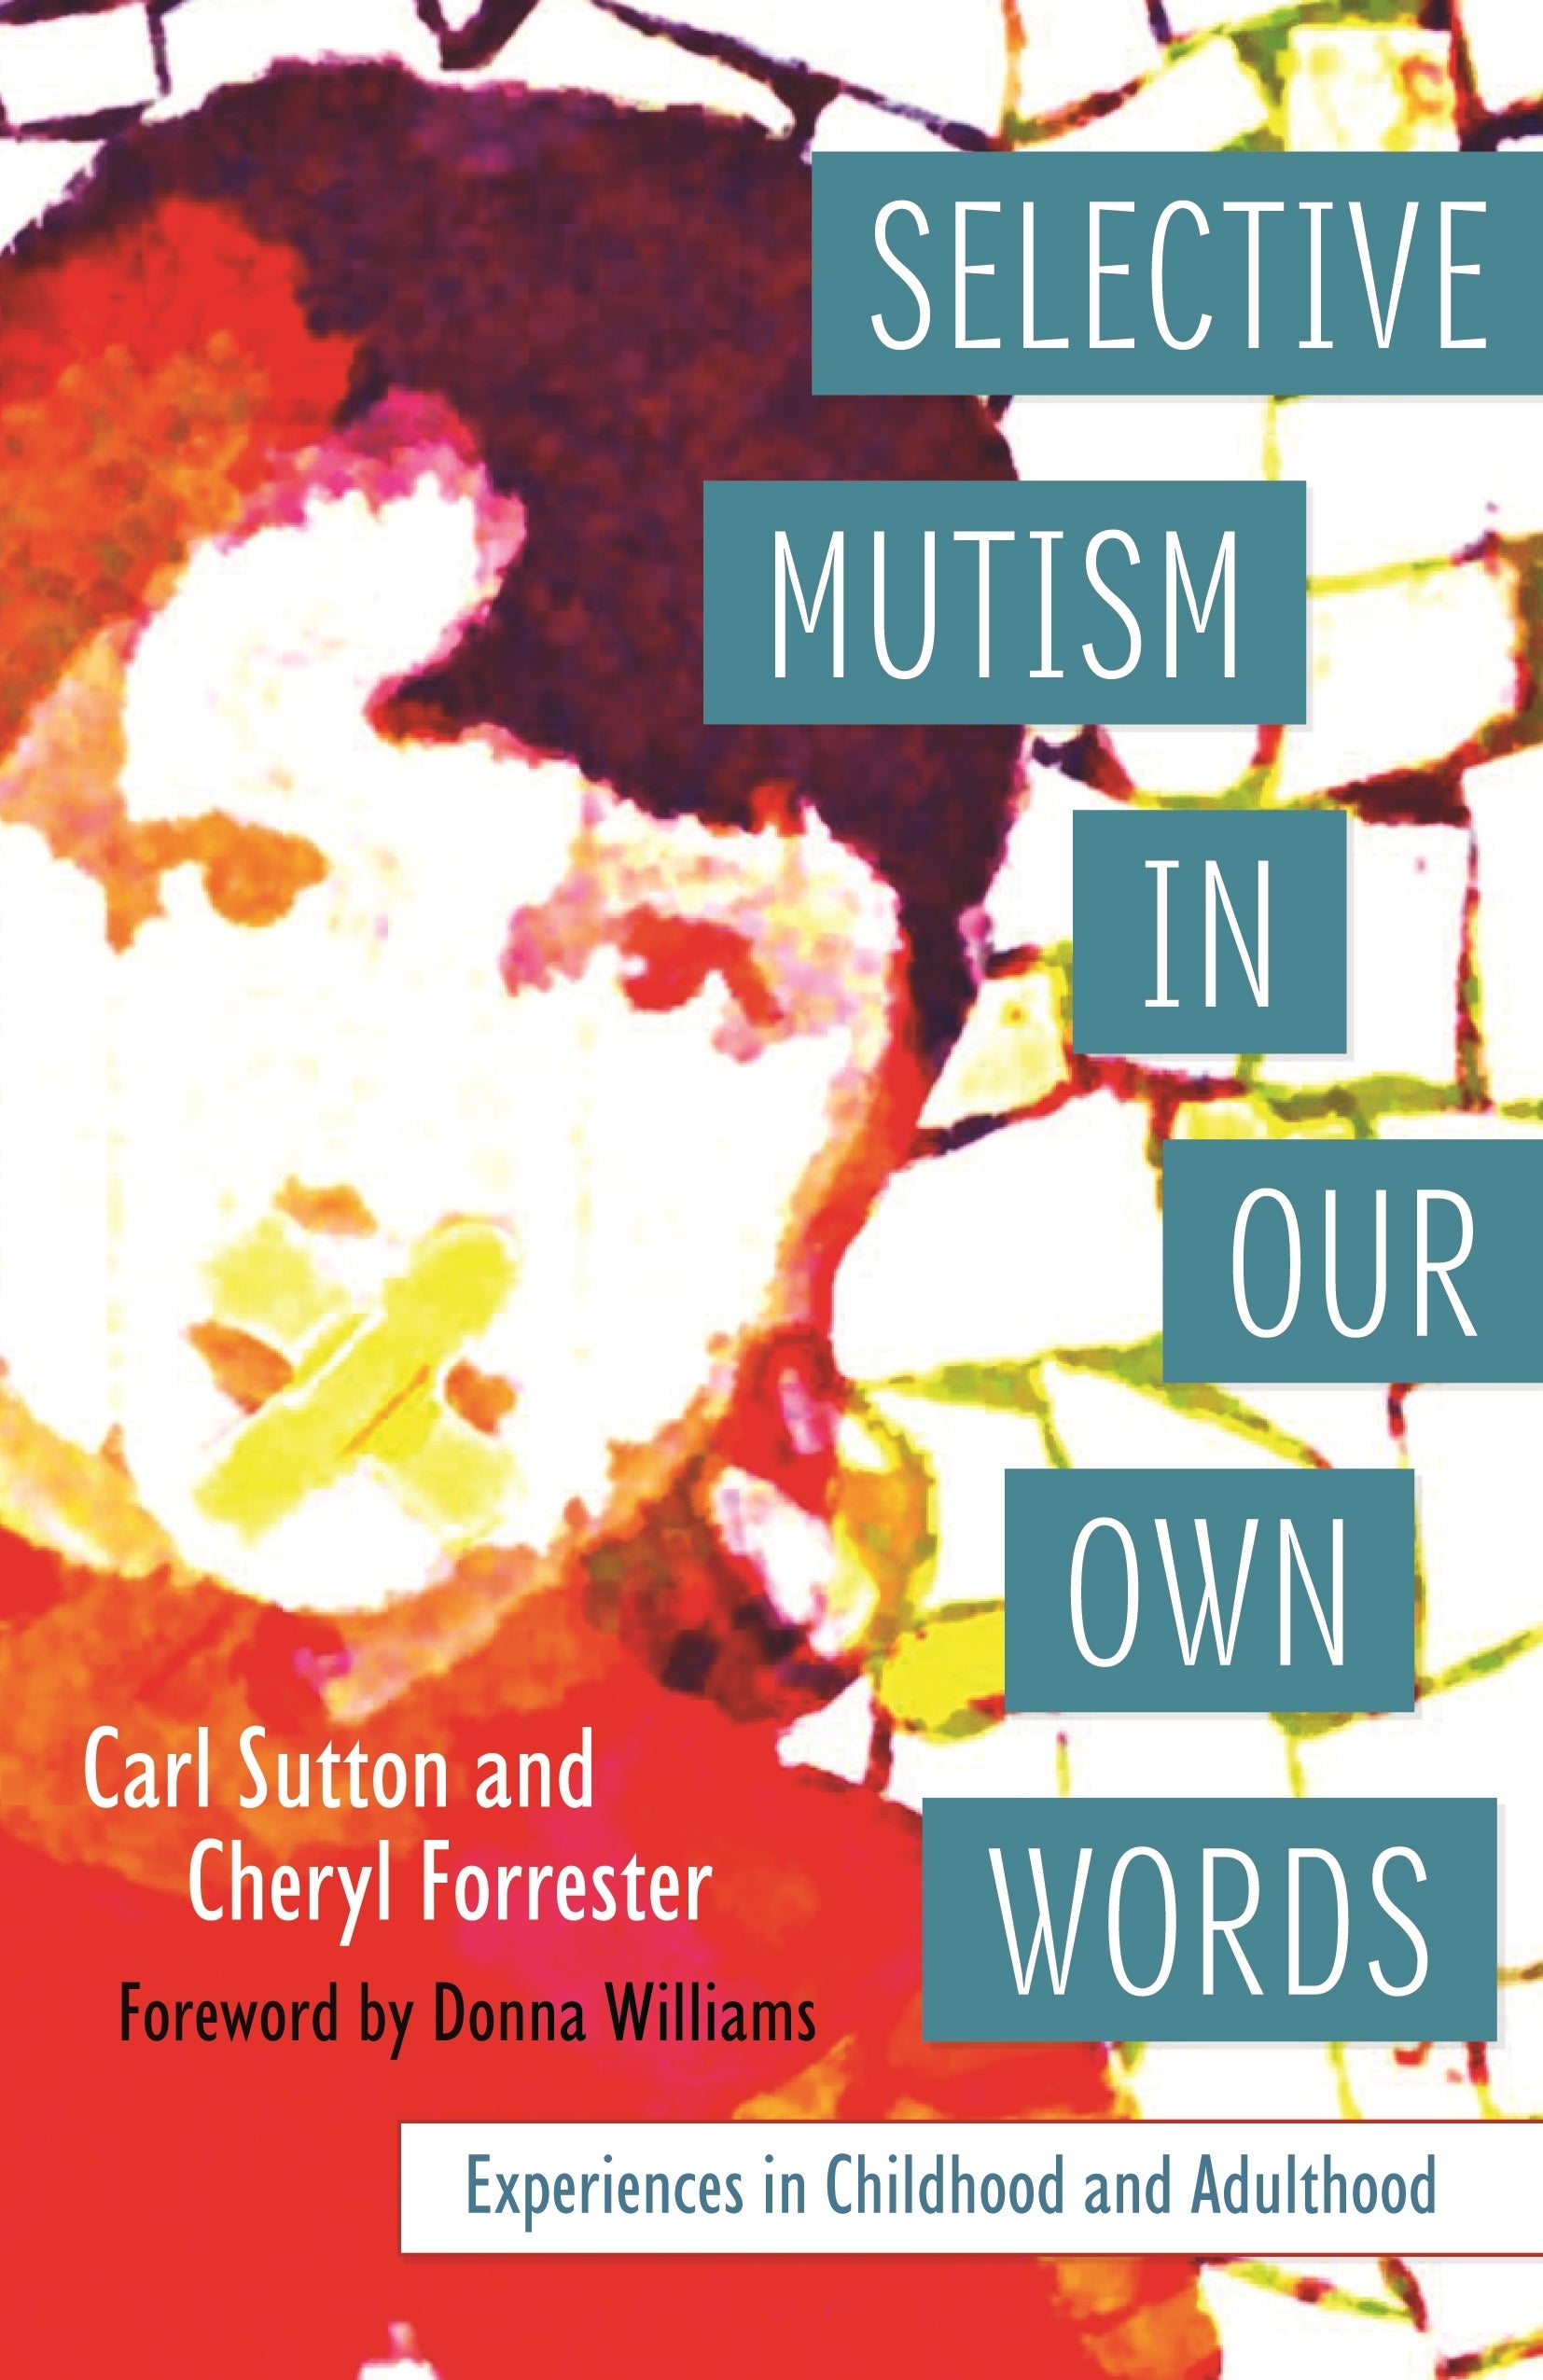 Selective Mutism In Our Own Words by Cheryl Forrester, Carl Sutton, Donna Williams